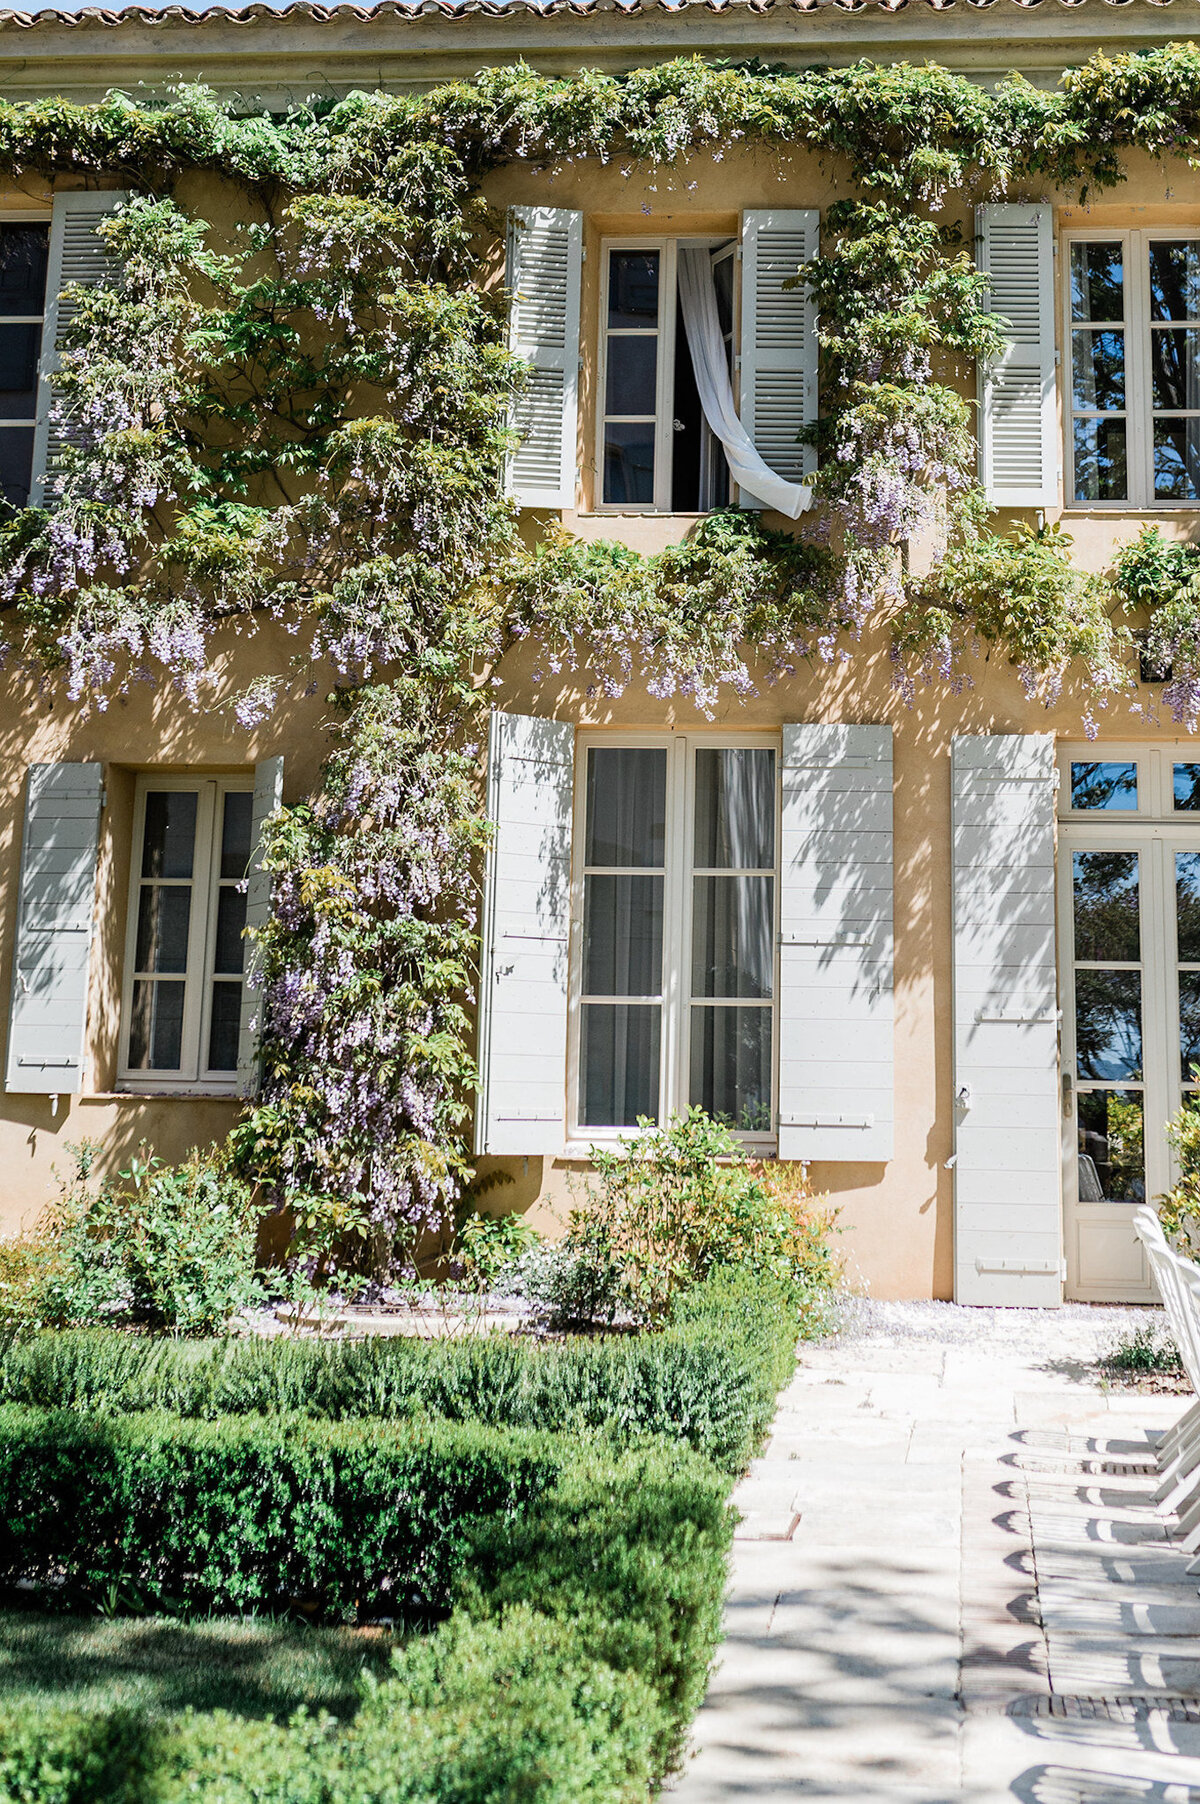 Elevate your wedding memories with the sophistication of our luxury photography. Our fine art approach in France transforms your special day into a visual narrative, highlighting both genuine emotions and curated elegance.